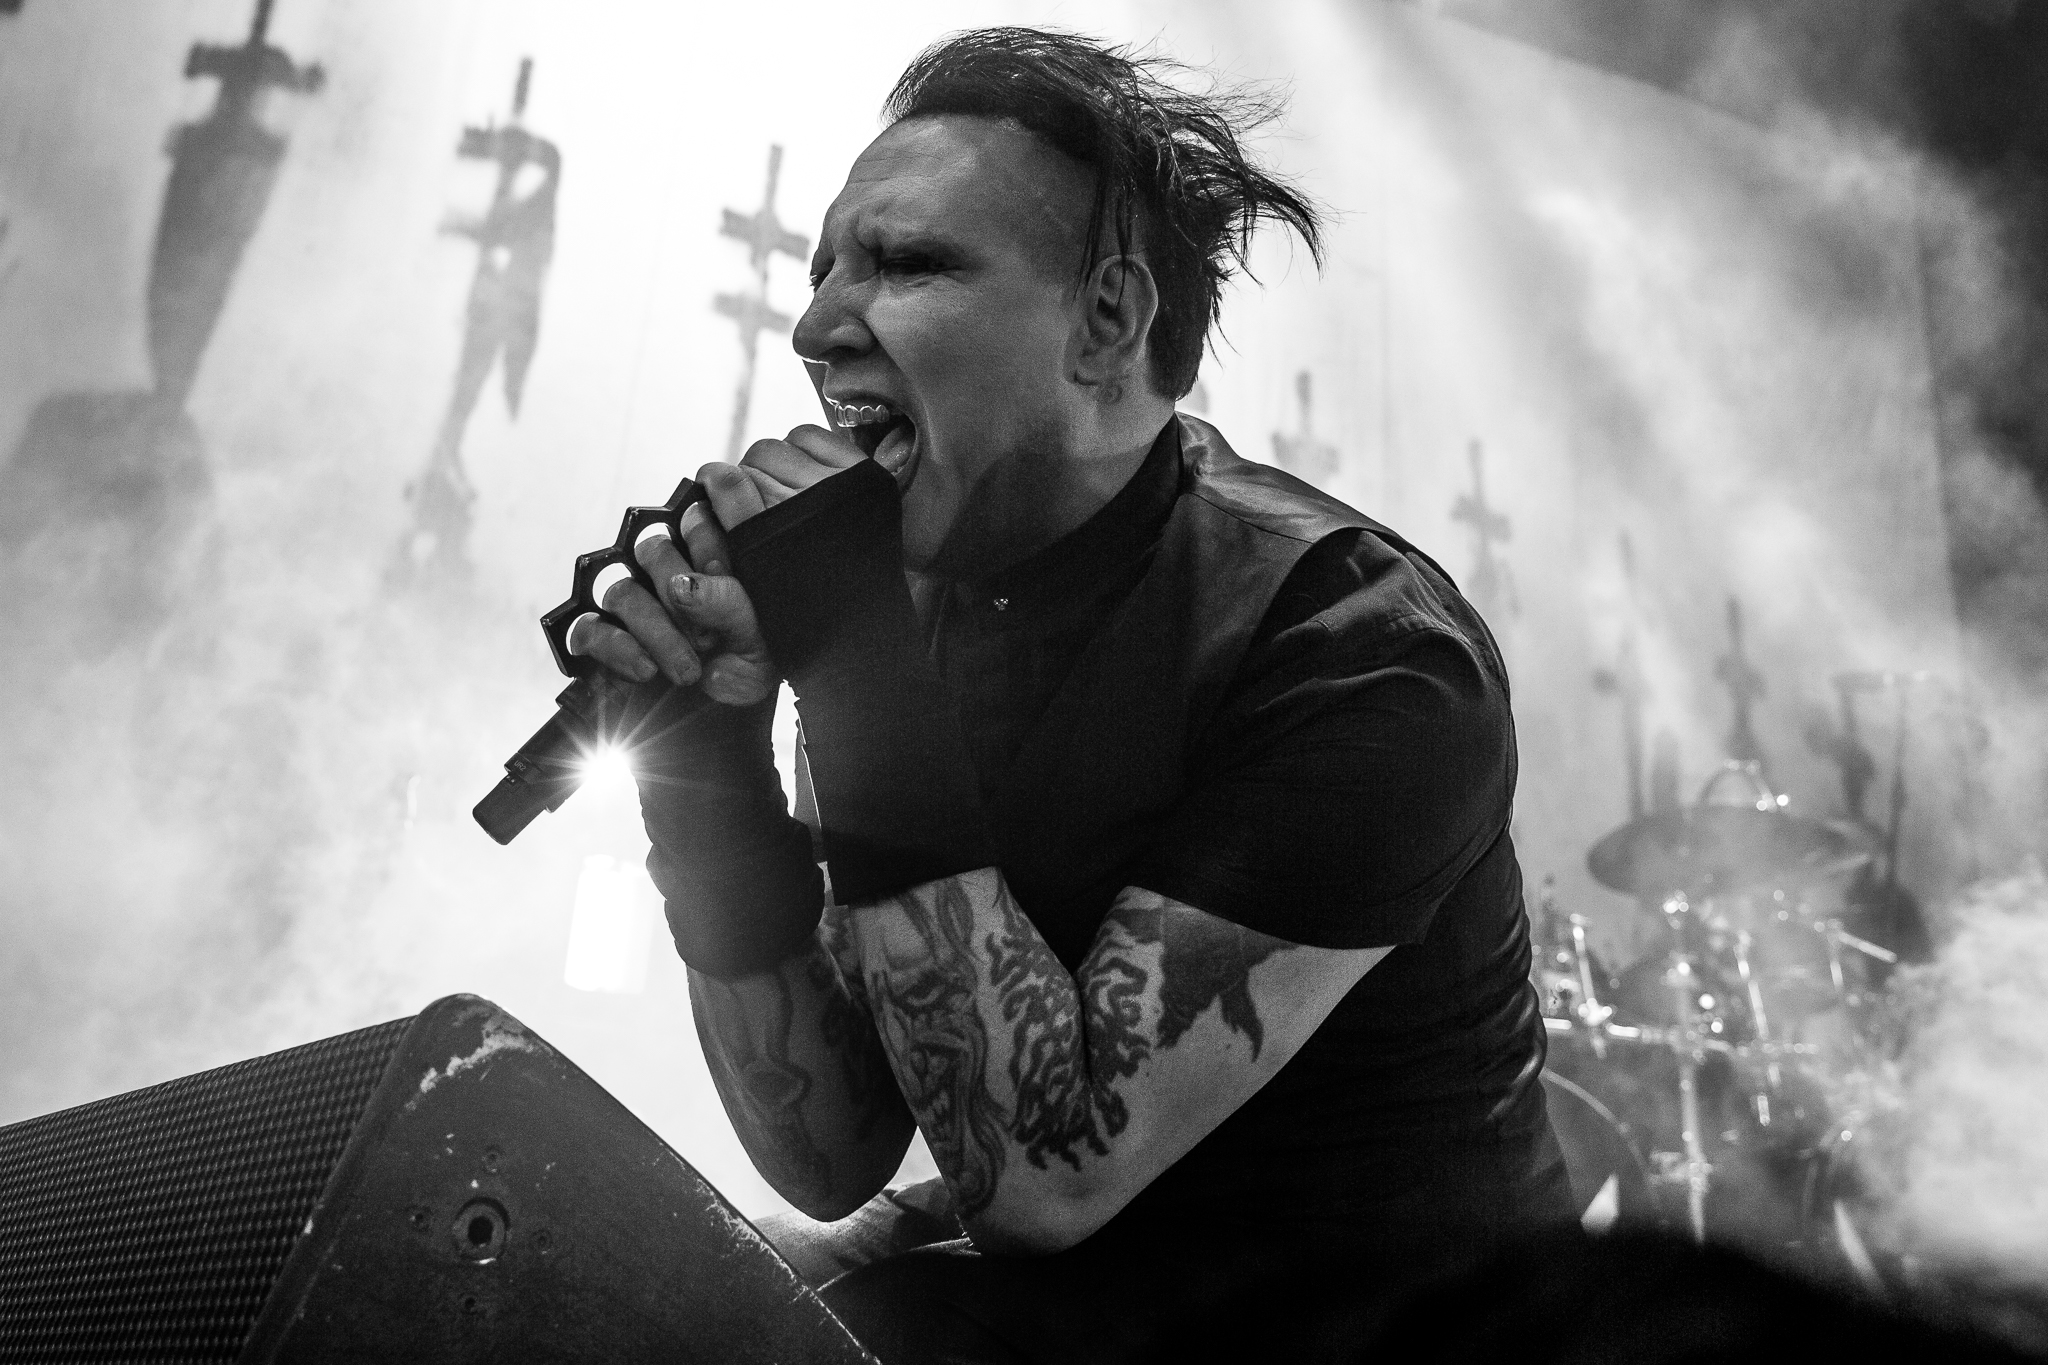 PREMIERE: Marilyn Manson Unleashes New Single “WE KNOW WHERE YOU FUCKING LIVE”